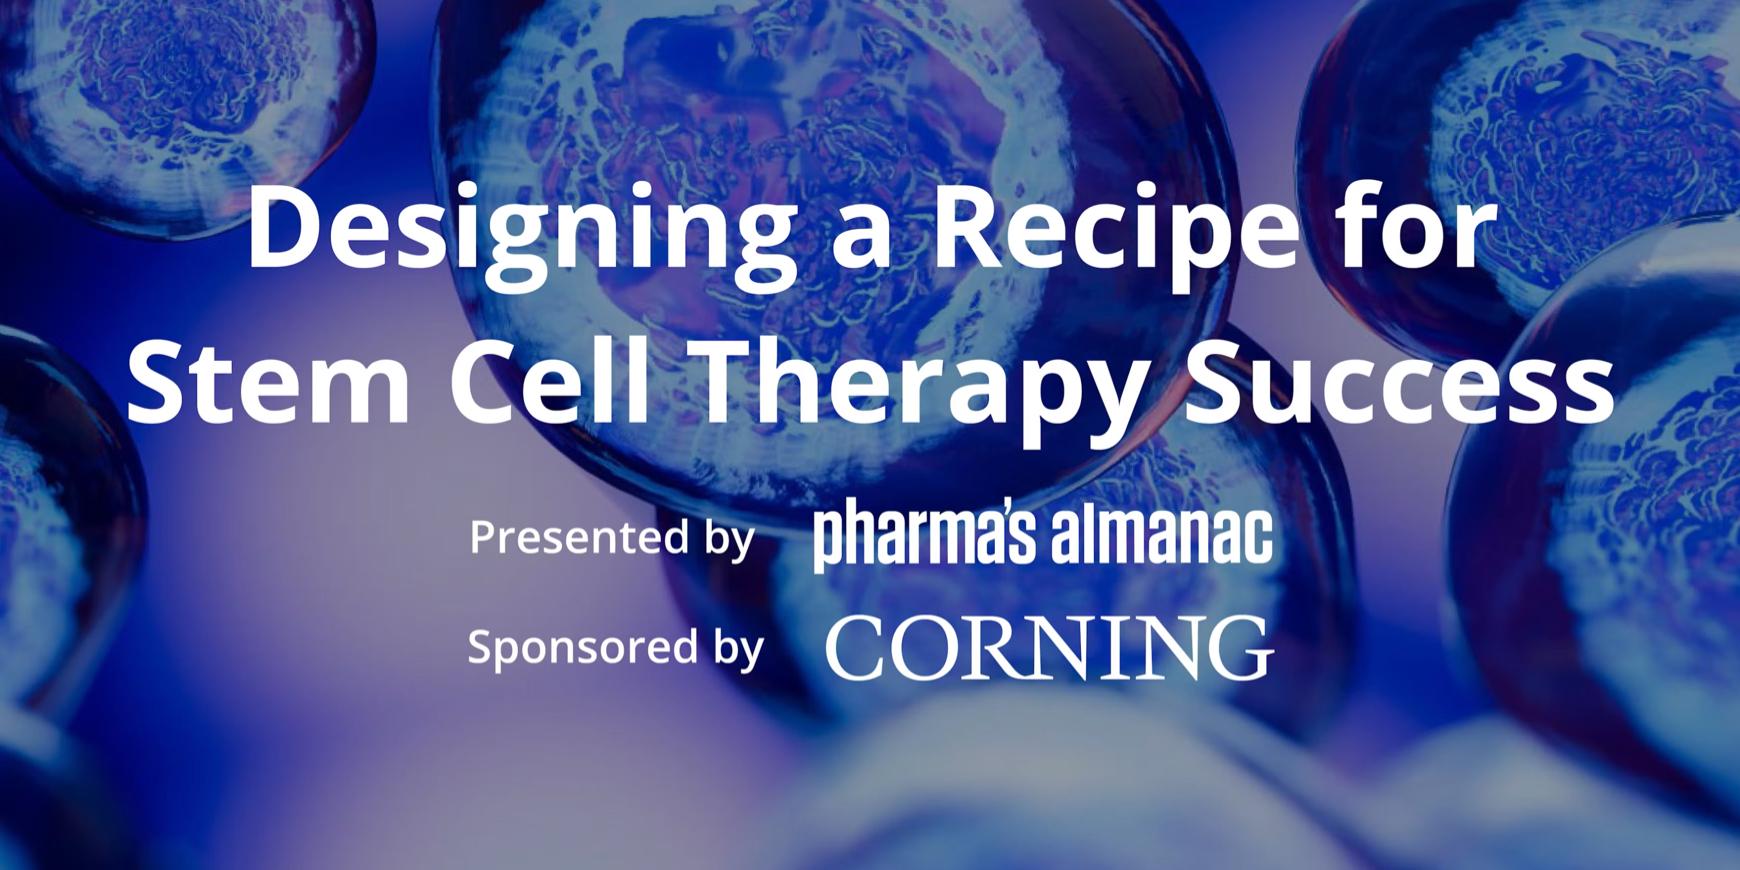 Designing A Recipe for Stem Cell Therapy Success